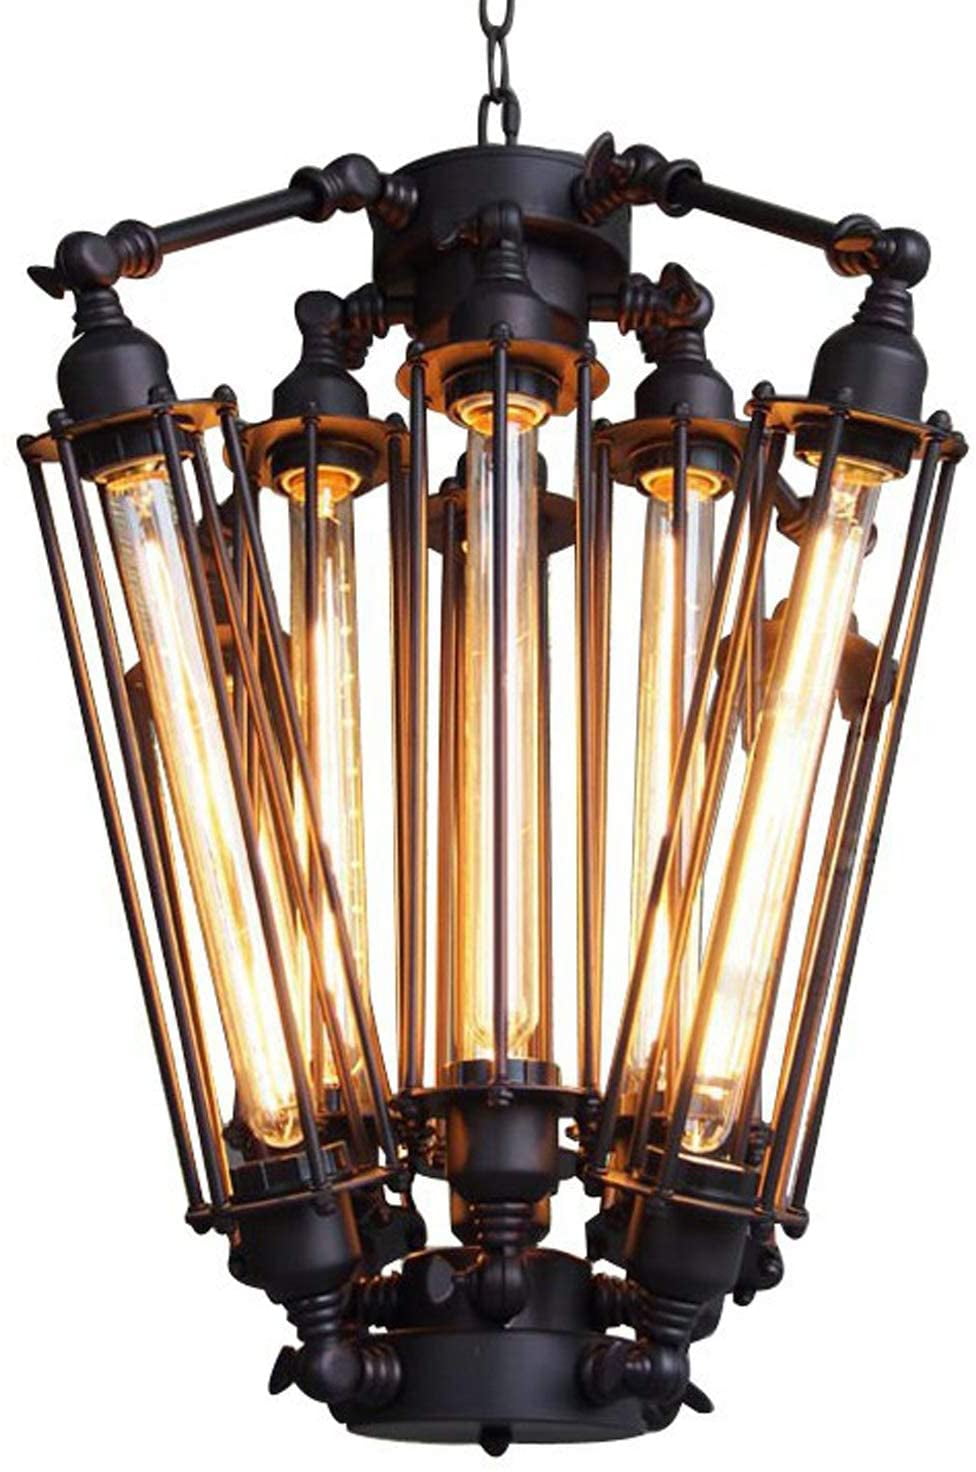 Oukaning 8 Heads Chandelier Vintage Pendant Light Steampunk